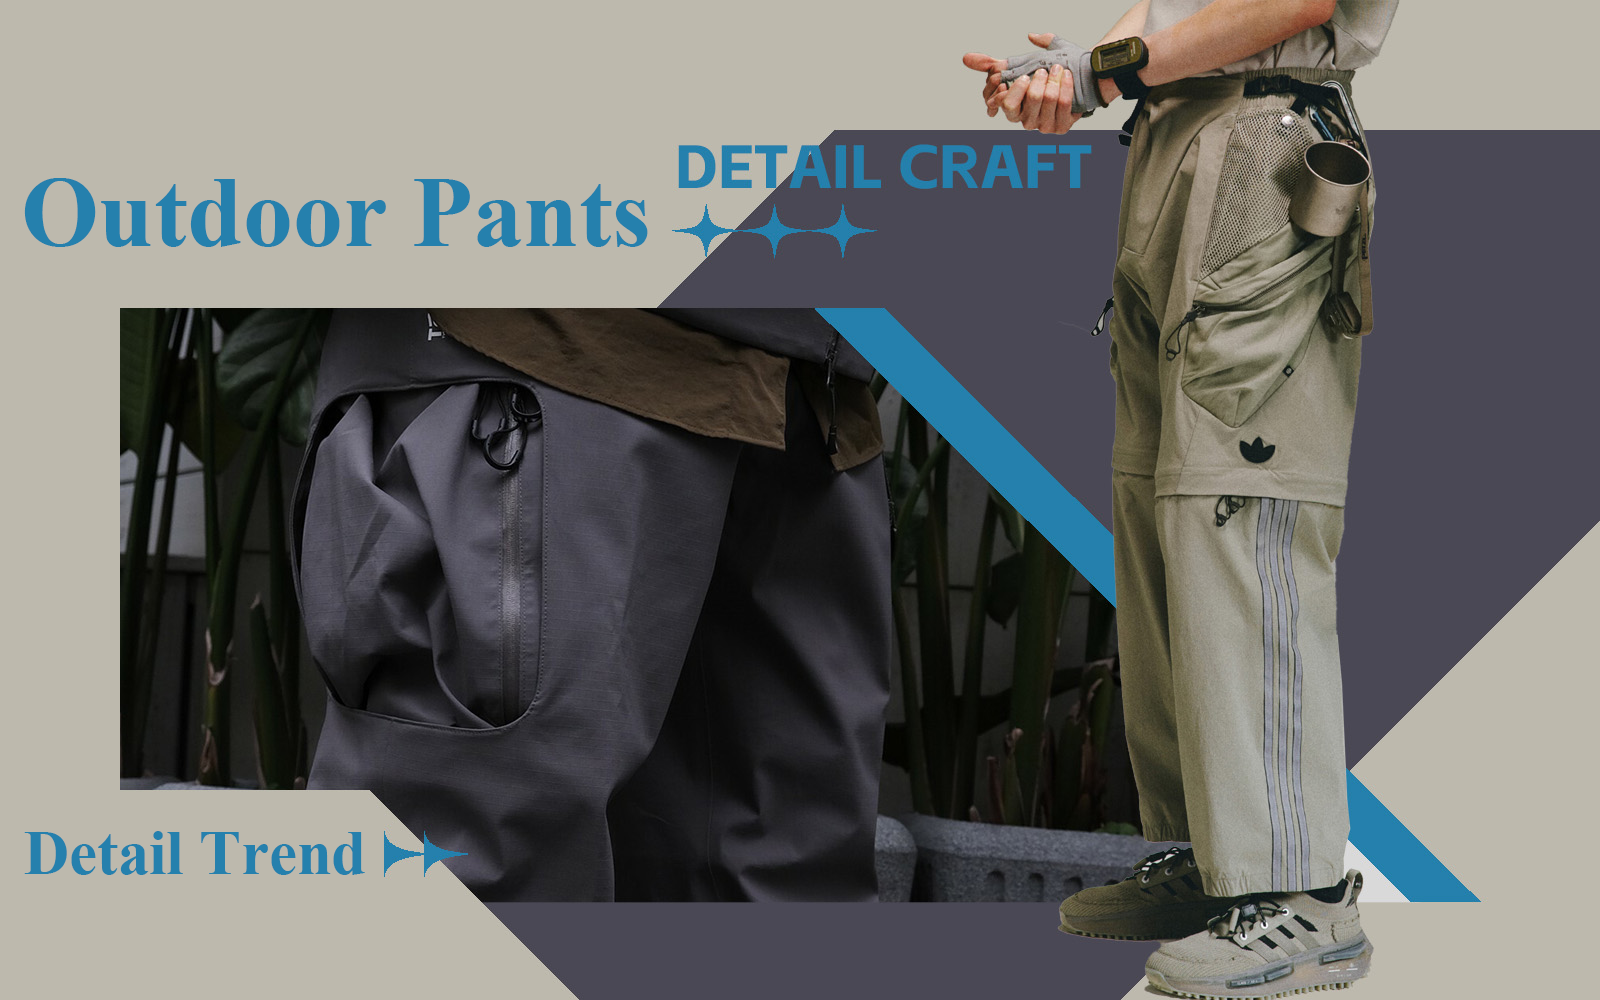 The Detail & Craft Trend for Men's Outdoor Pants